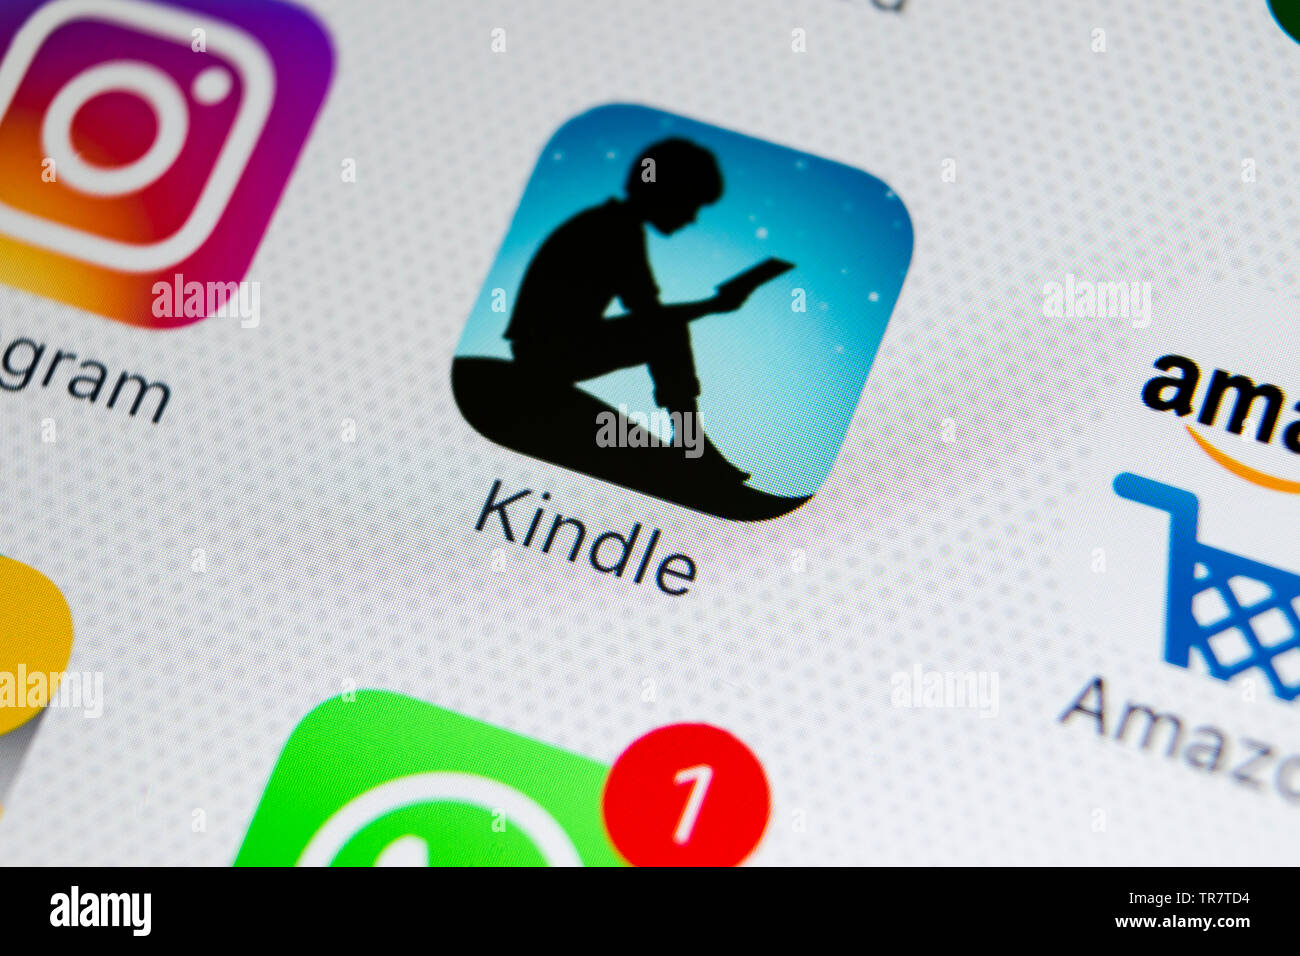 Sankt-Petersburg, Russia, February 28, 2018: Amazon Kindle application icon on Apple iPhone X screen close-up. Amazon Kindle app icon. Amazon kindle a Stock Photo